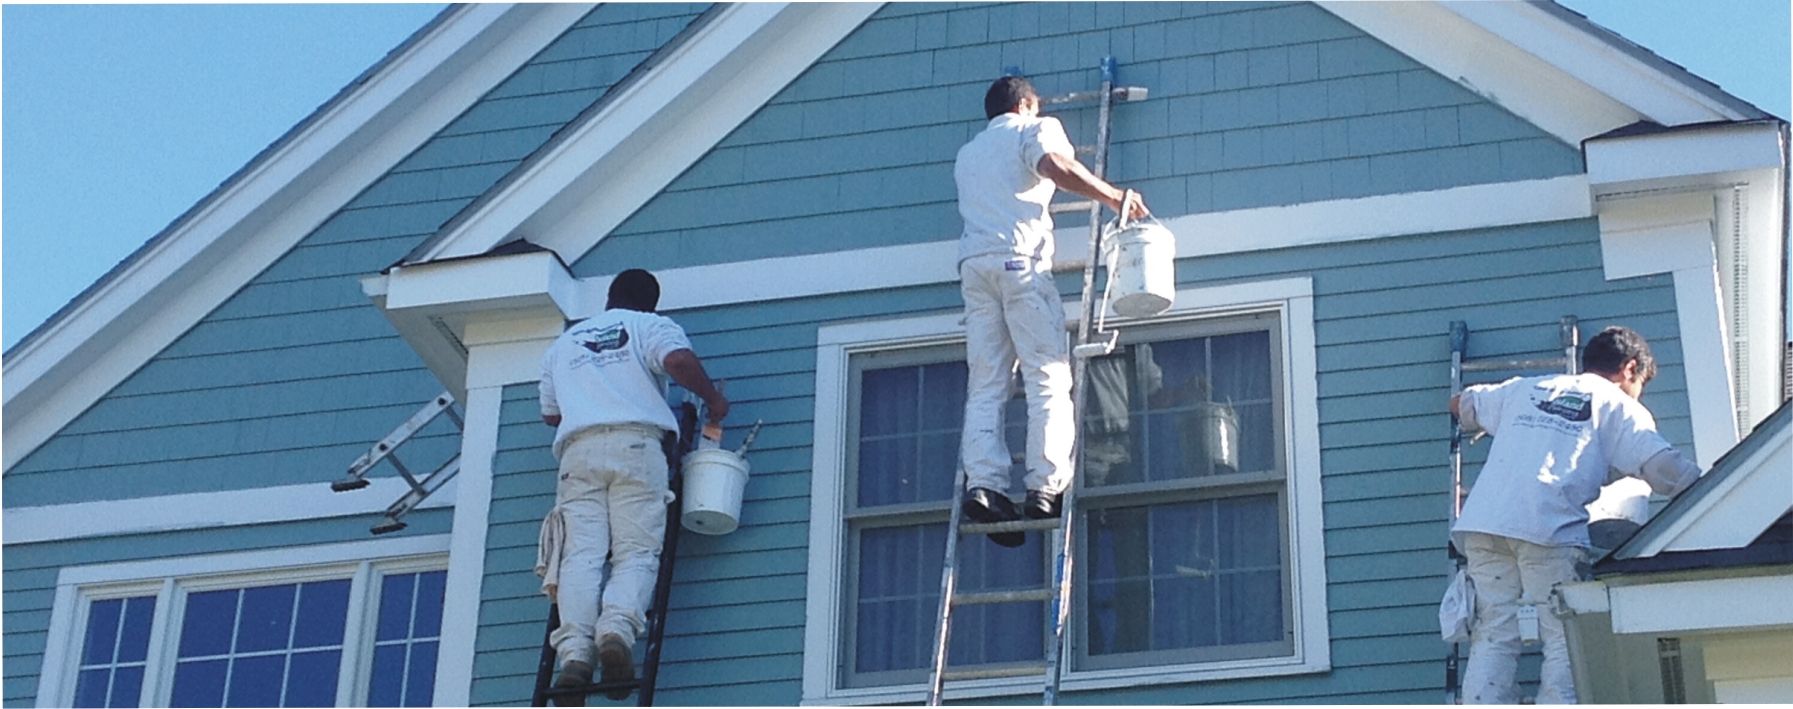 Benefits Of Hiring Exterior Painting Services In Middleton MA | Exterior Painting Services